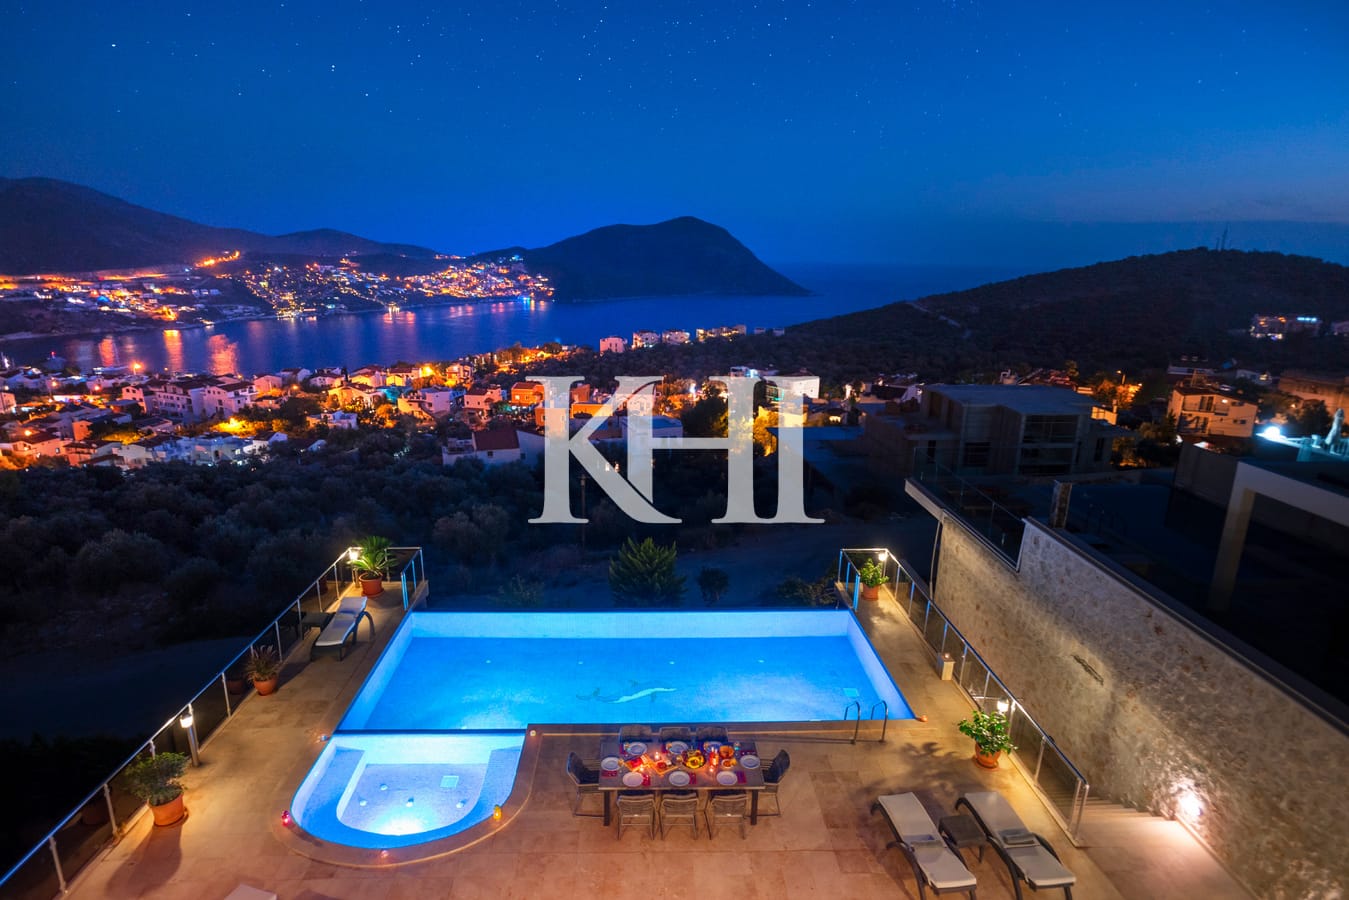 Detached Villa For Sale With Panoramic Kalkan View Slide Image 18